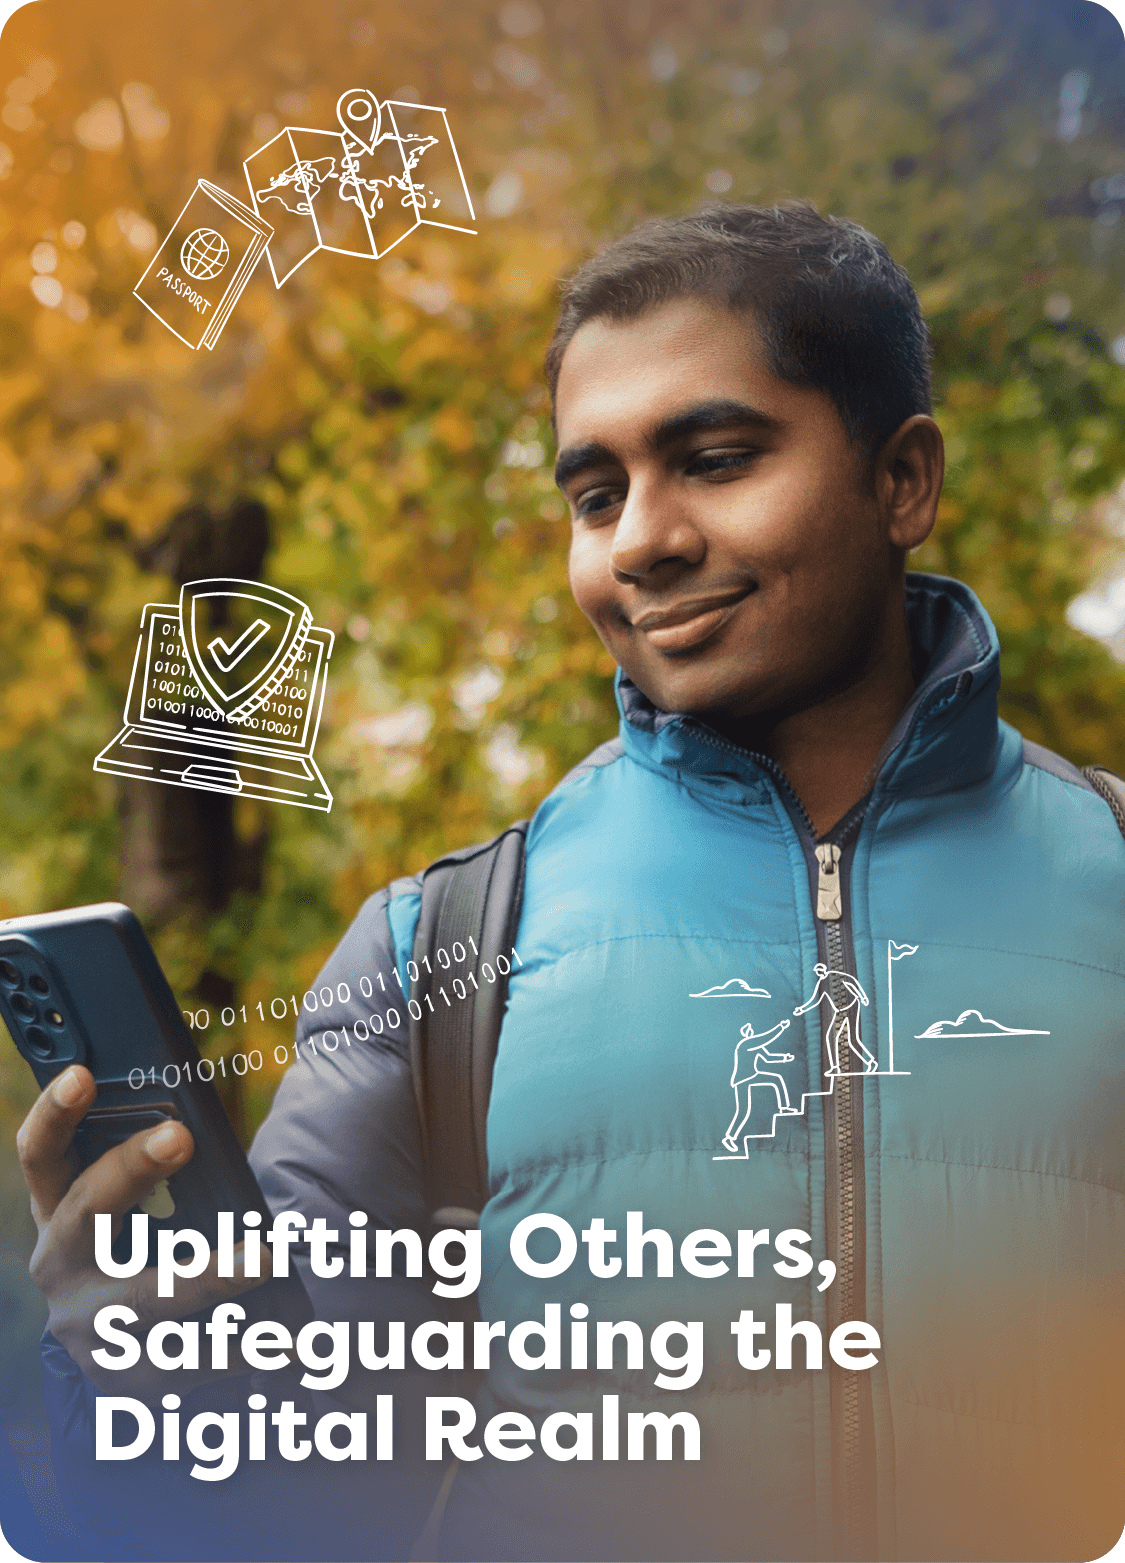 Uplifting Others, Safeguarding the Digital Realm